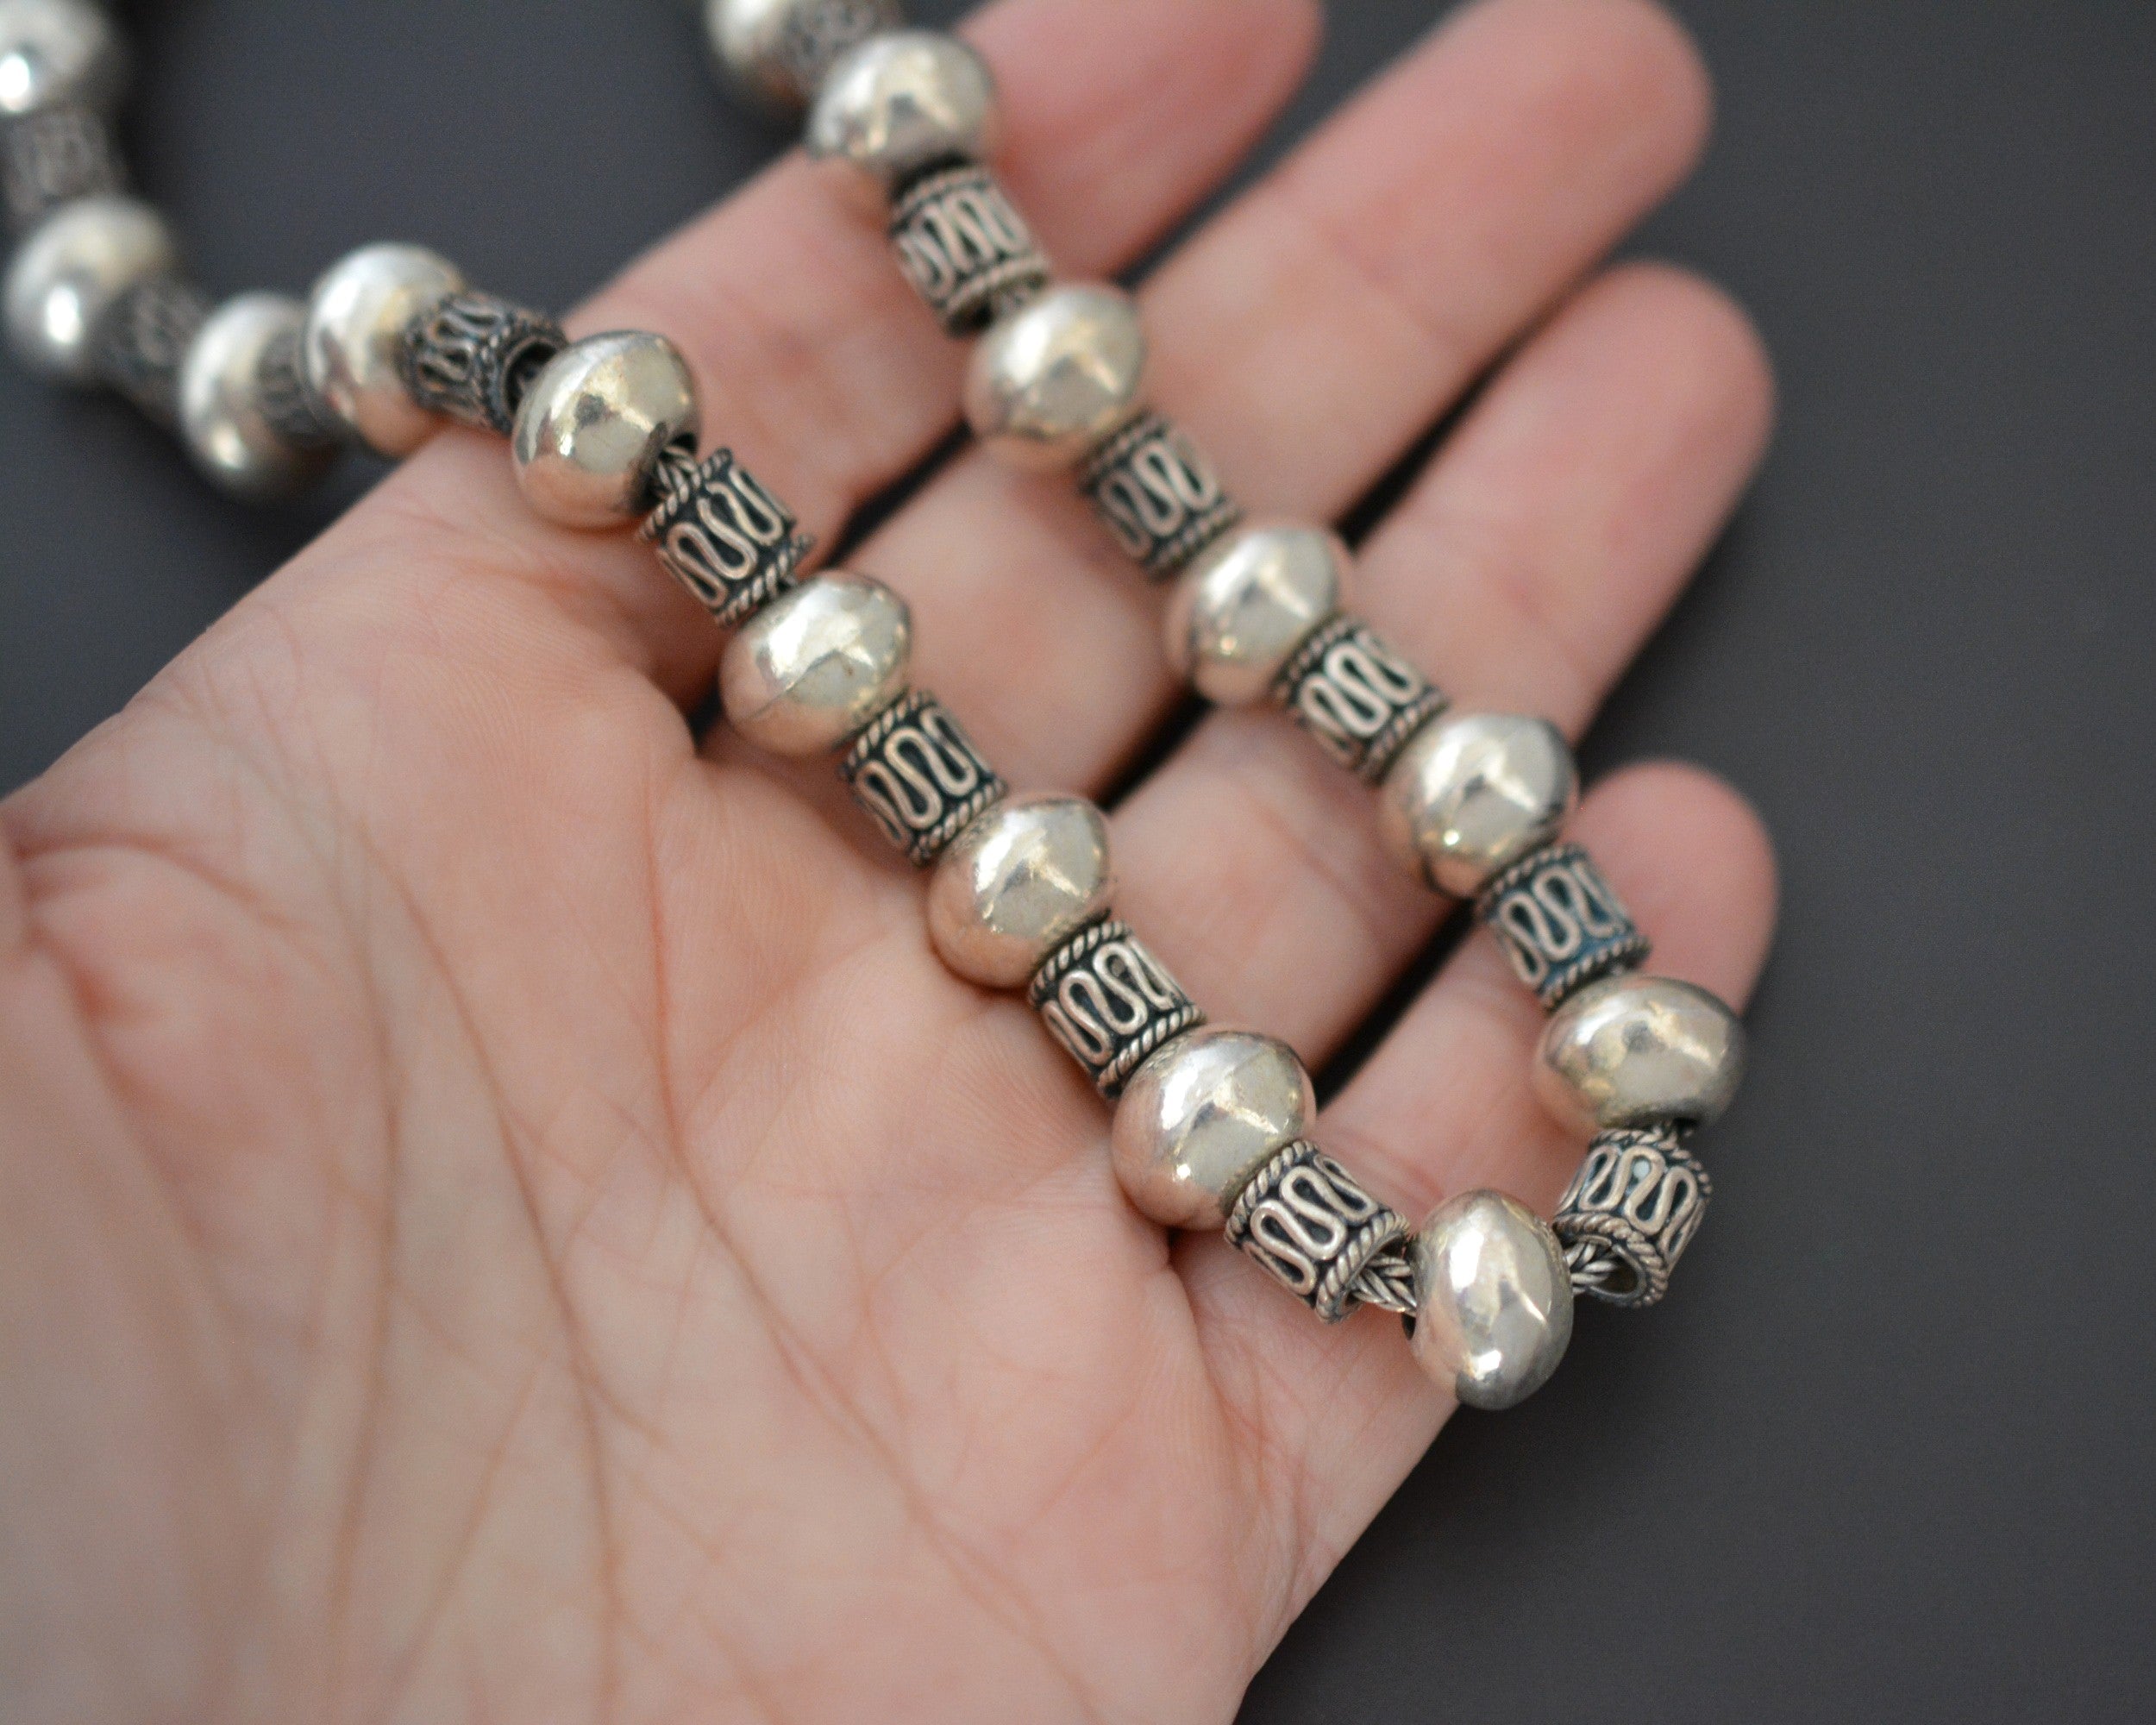 Bali Silver Beads Necklace on Snake Chain